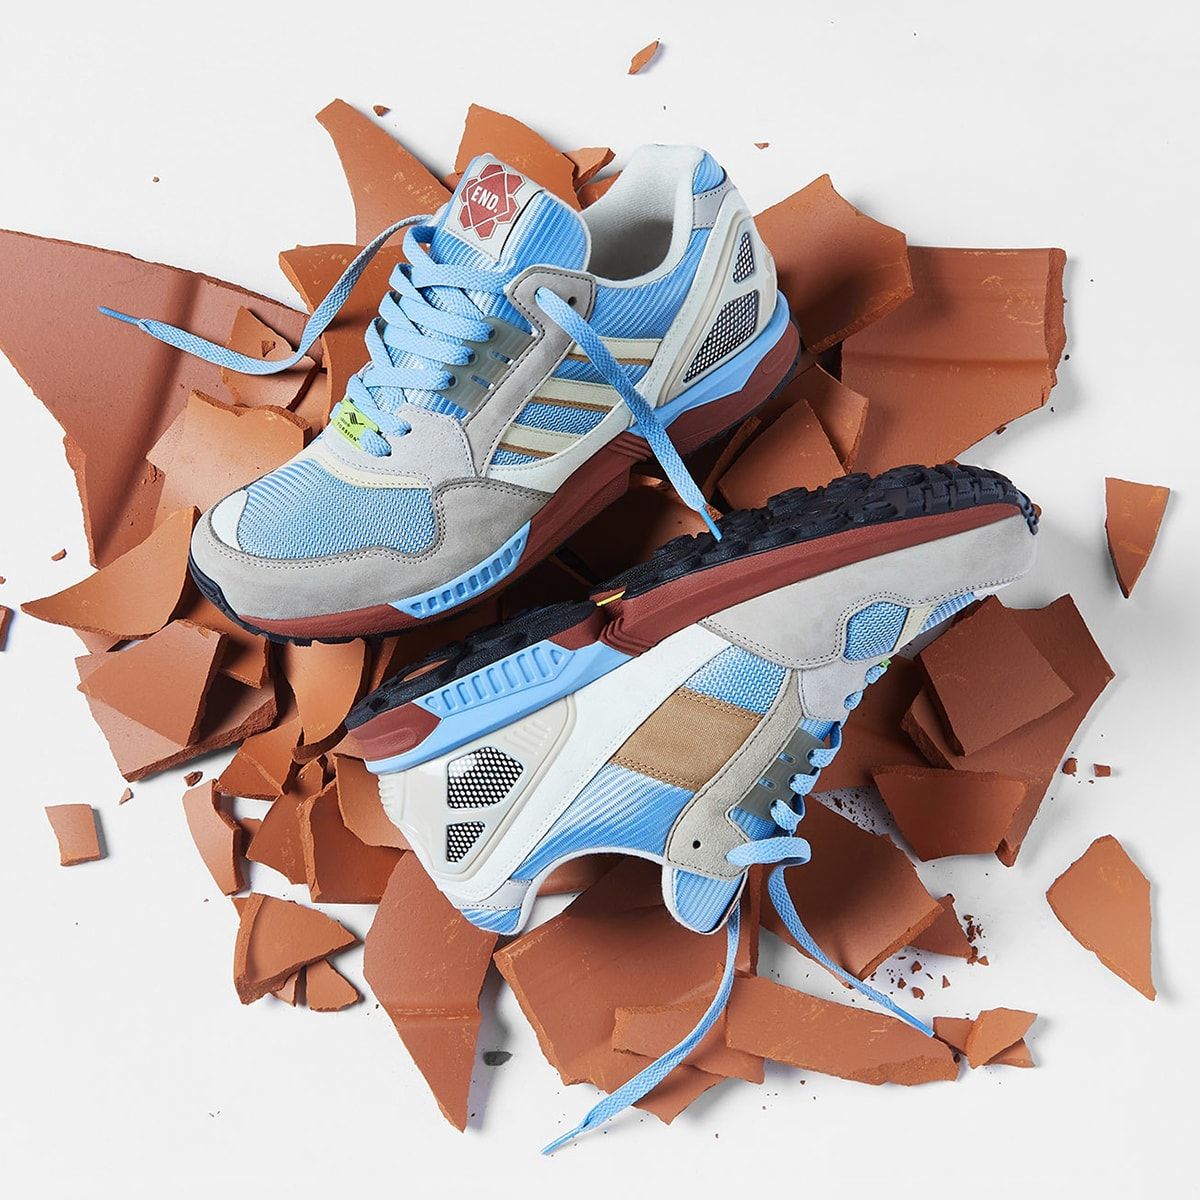 END x adidas ZX 9000 “Kiln” Drops This Week! | House of Heat°